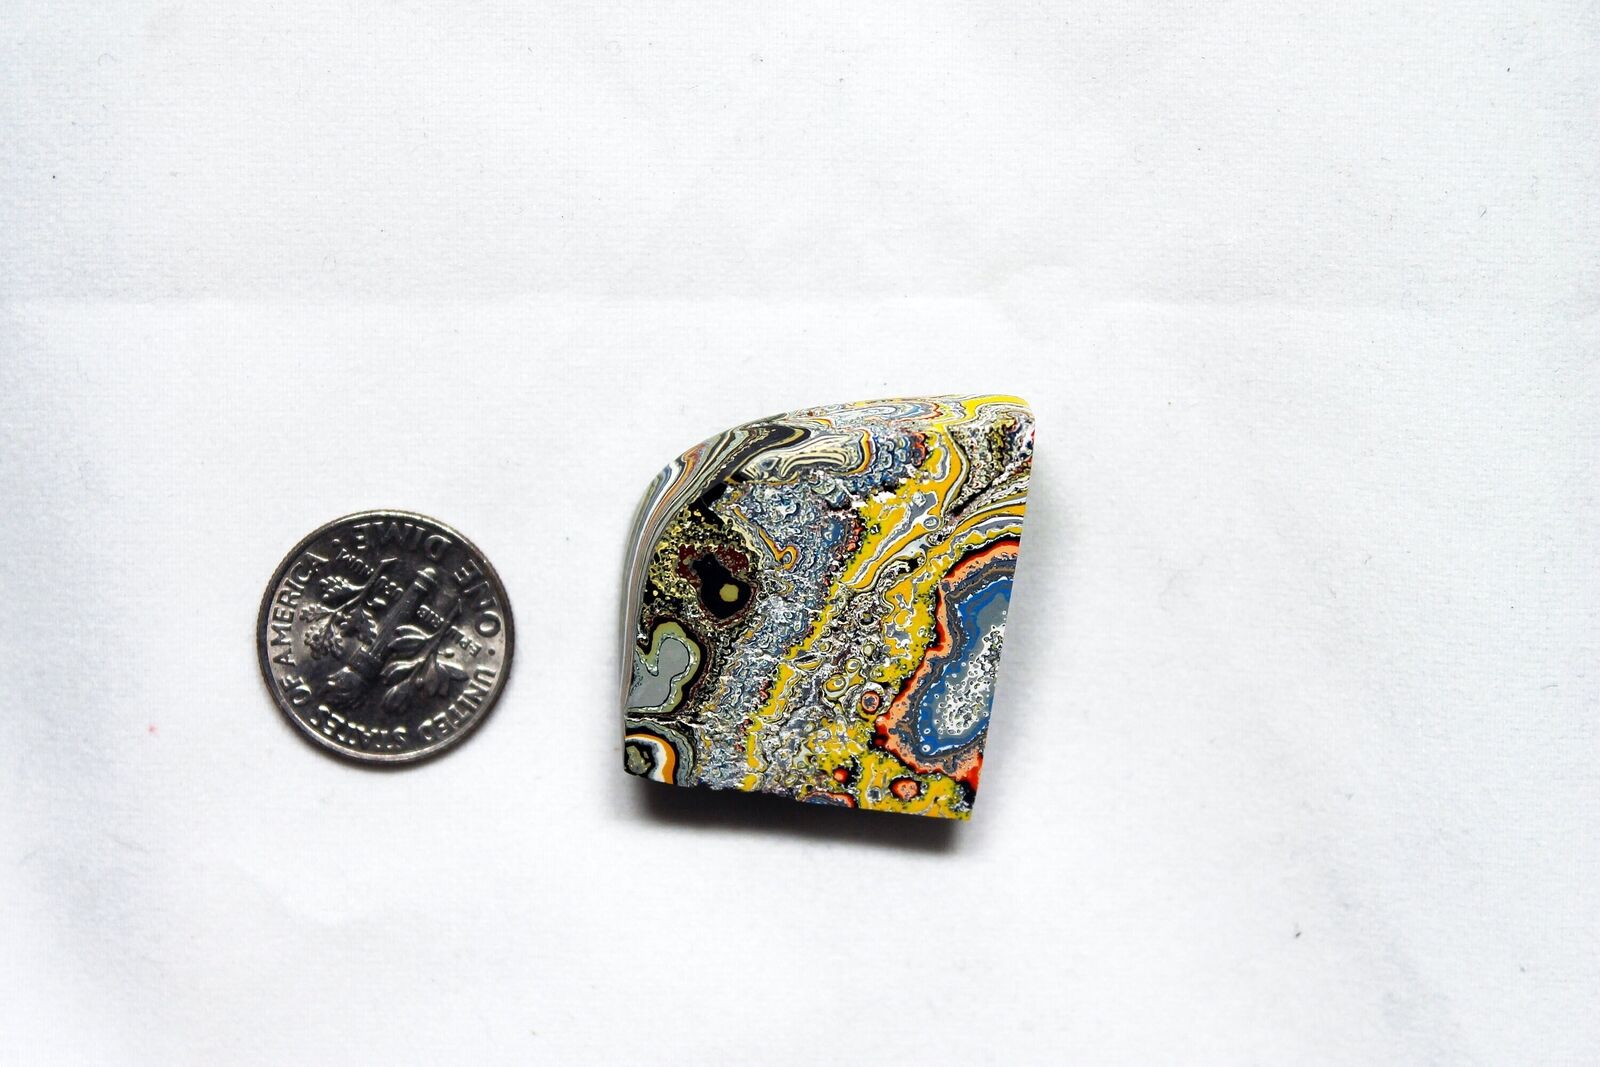 Finished Piece of Fordite - Fordite From Late 1970's/Early 80's - 27.32mm x 25.